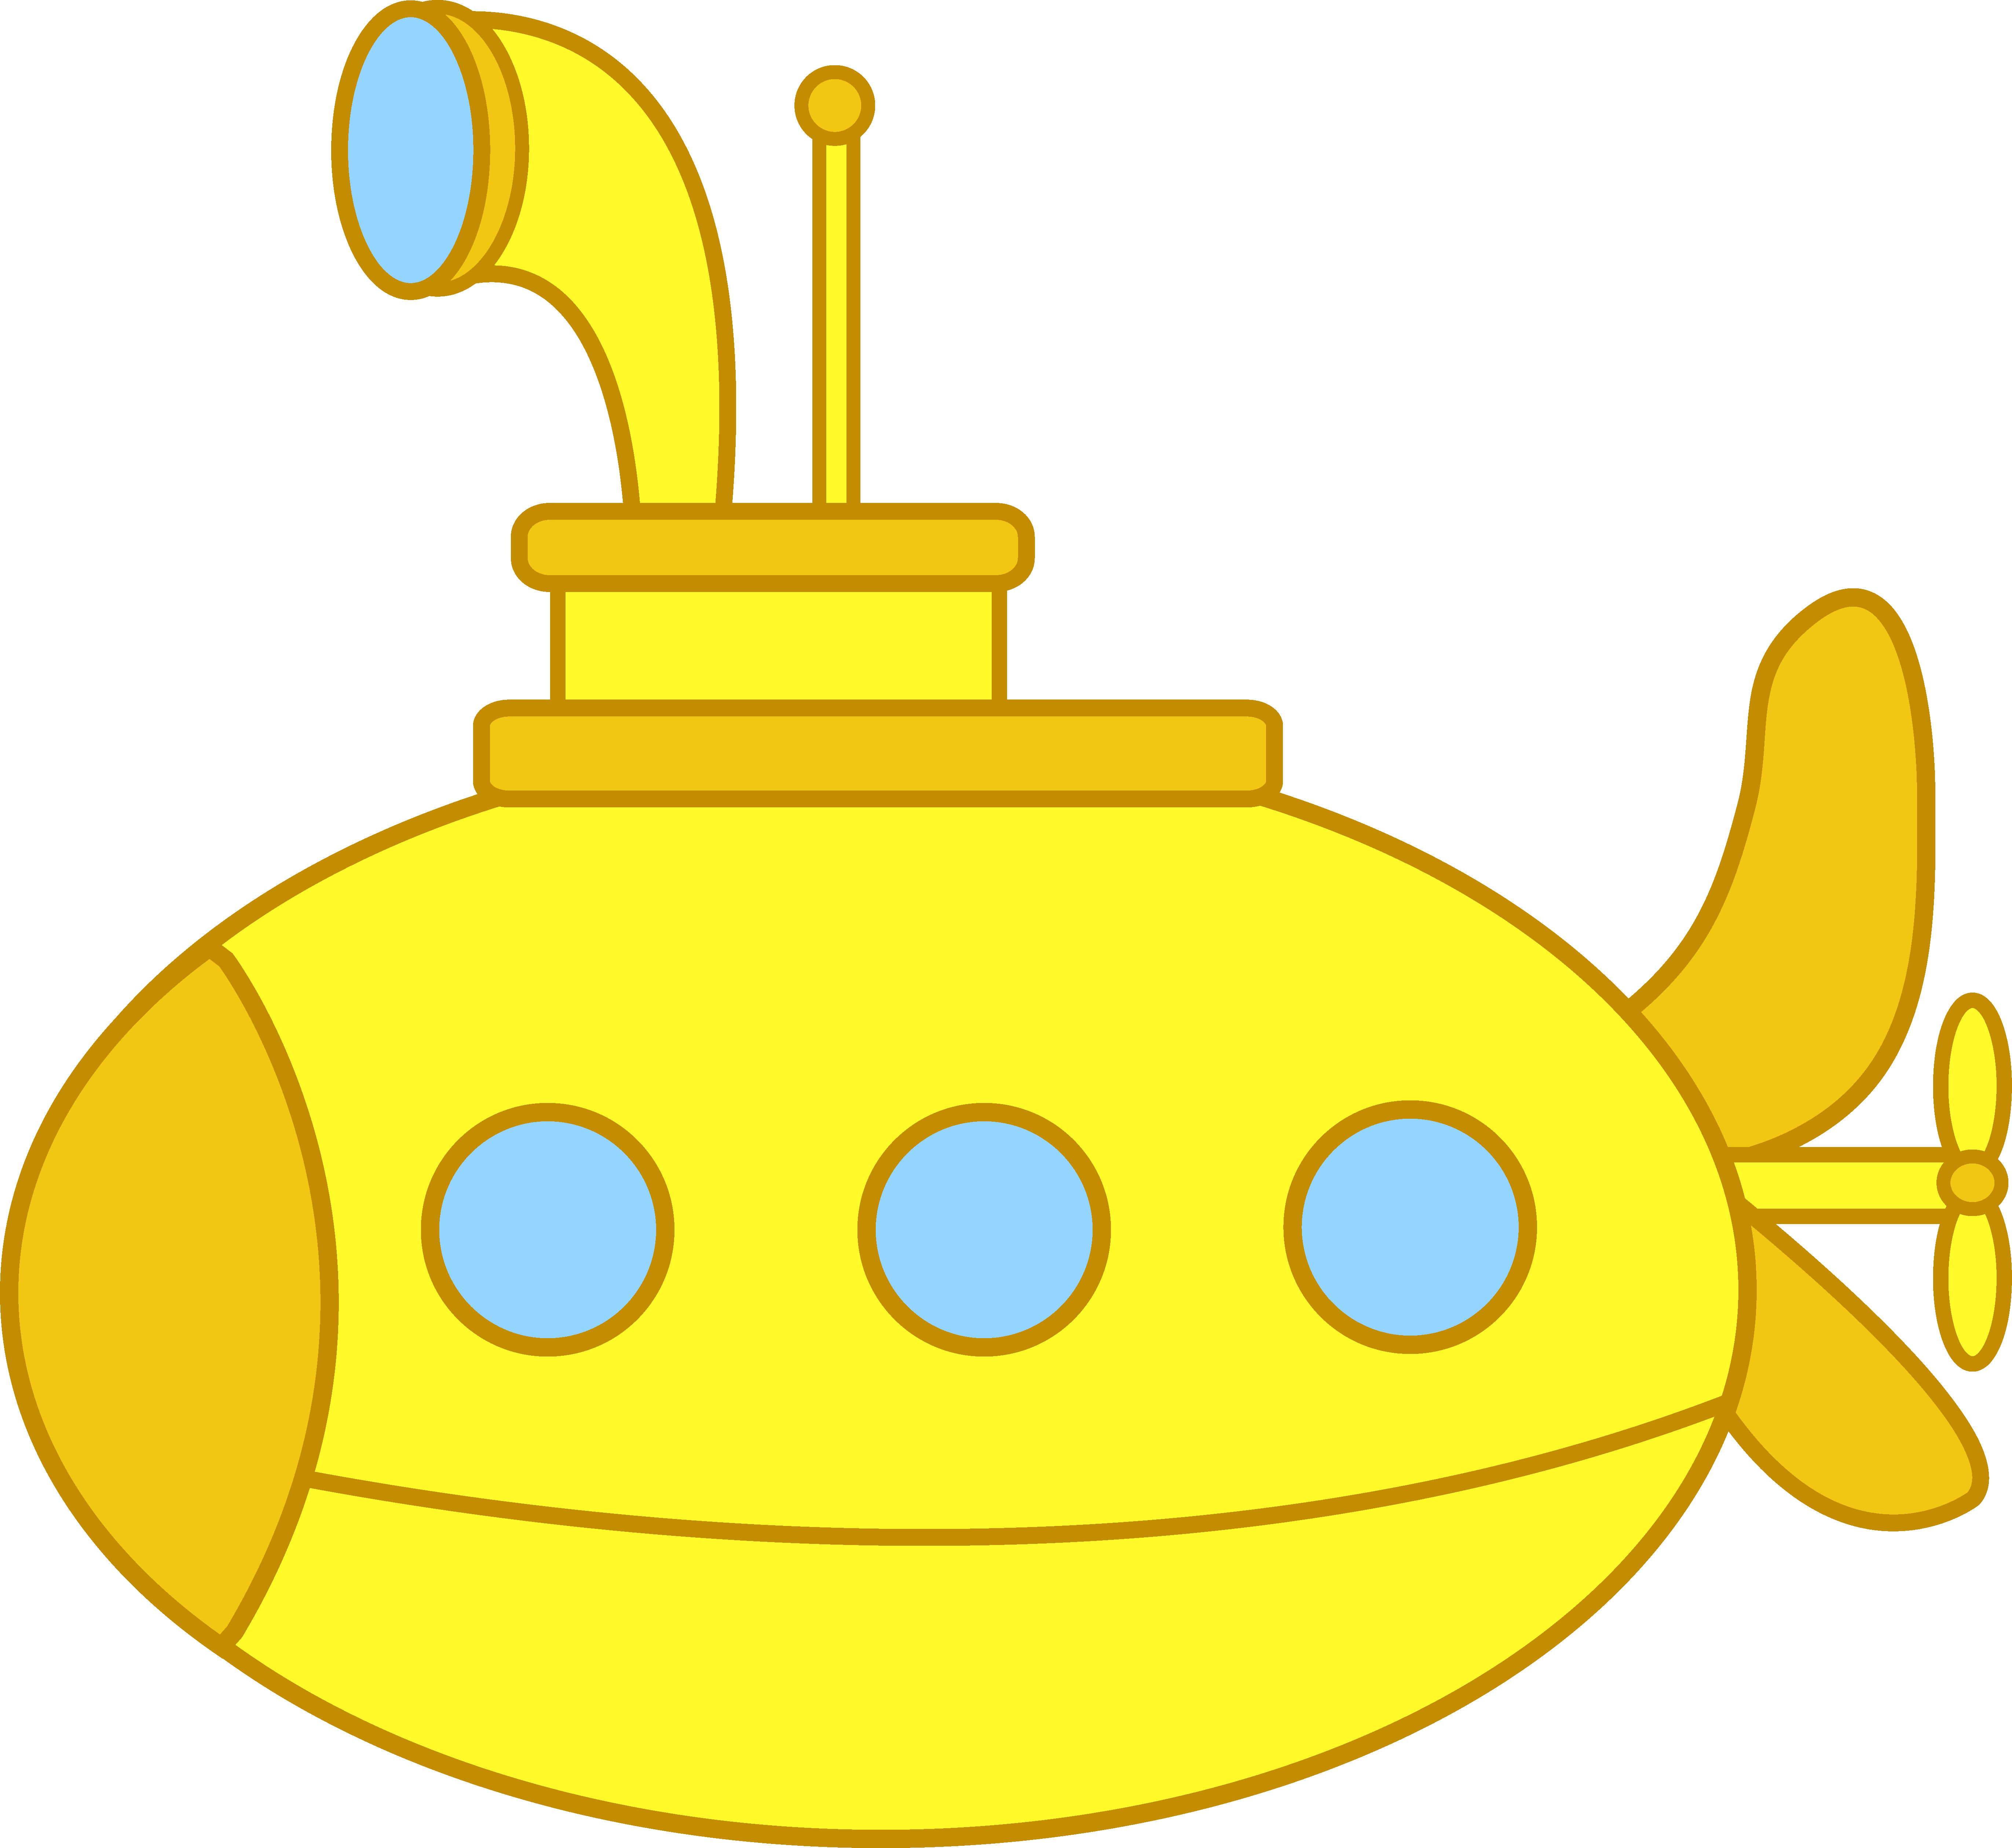 Submarines and other clipart images on Cliparts pub ™.